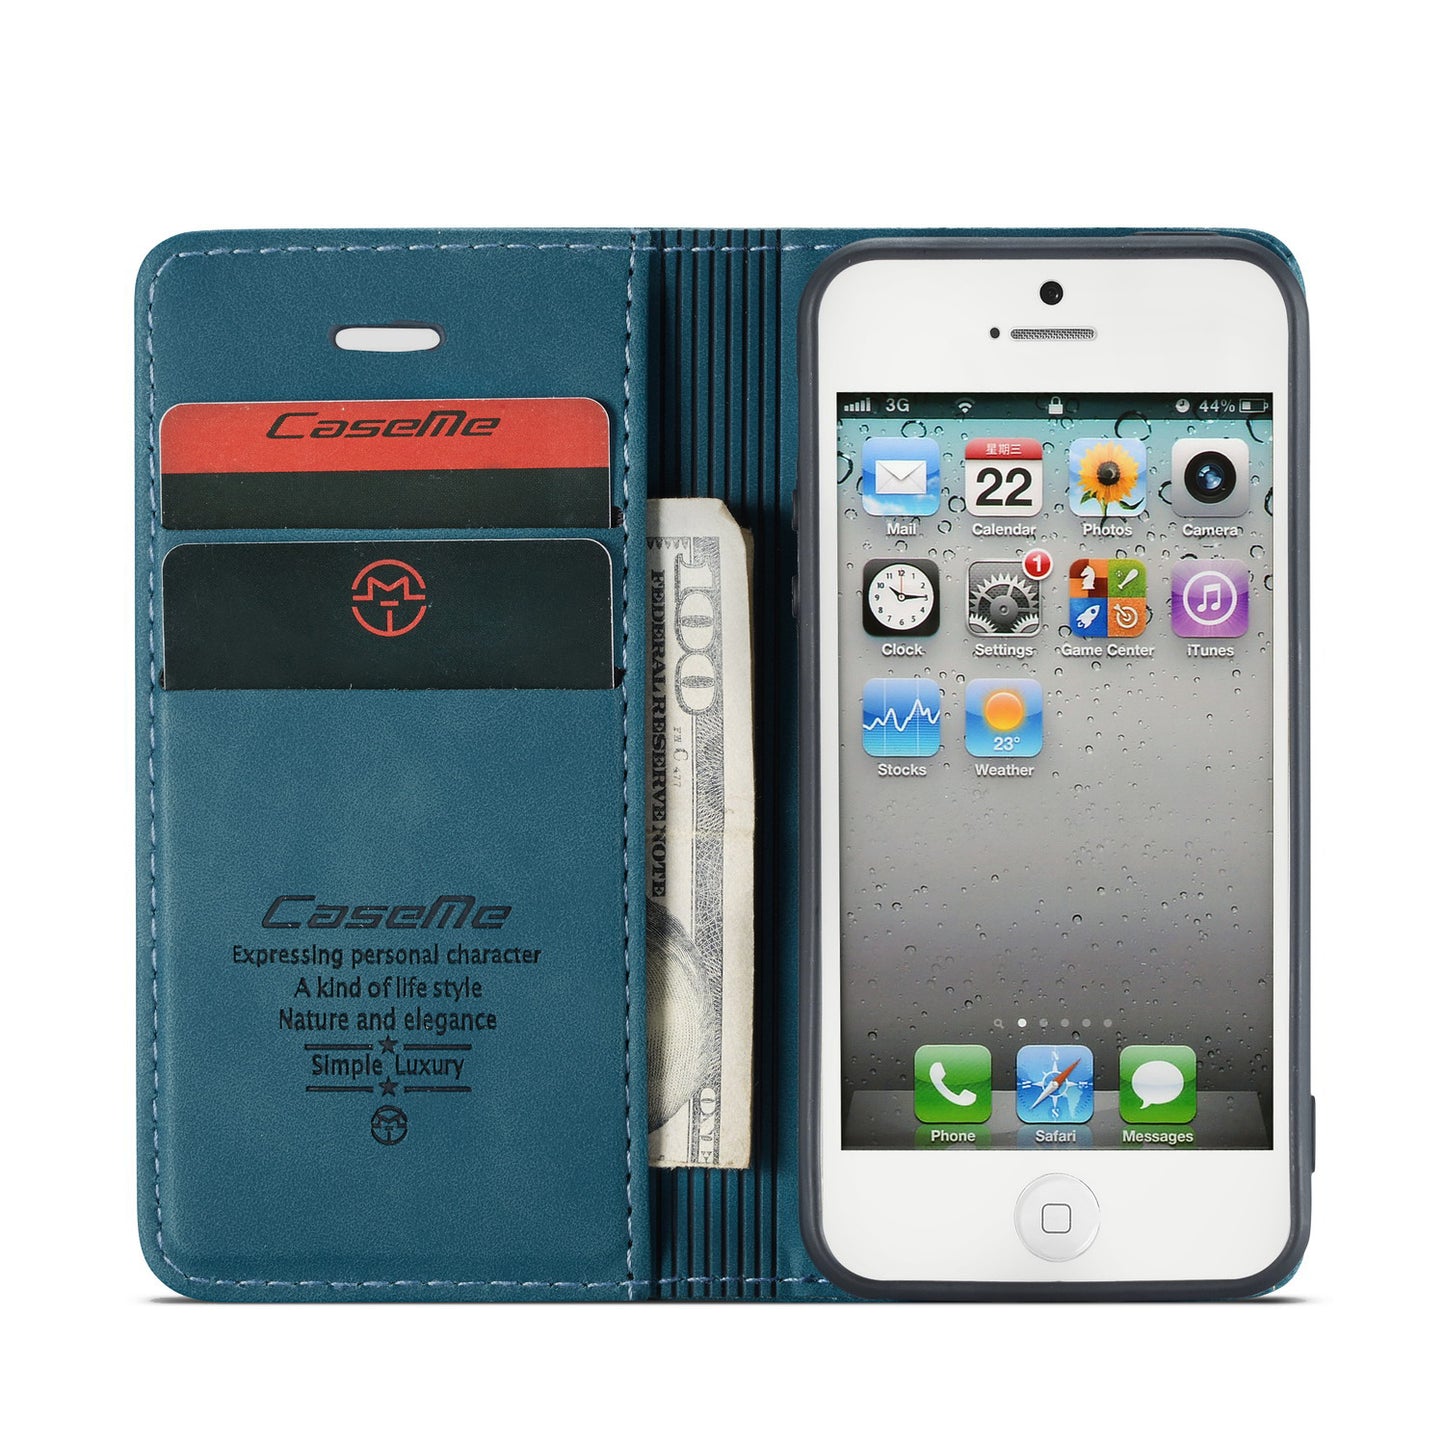 Book Classical iPhone 5/5s Leather Case Retro Slim Wallet Stand